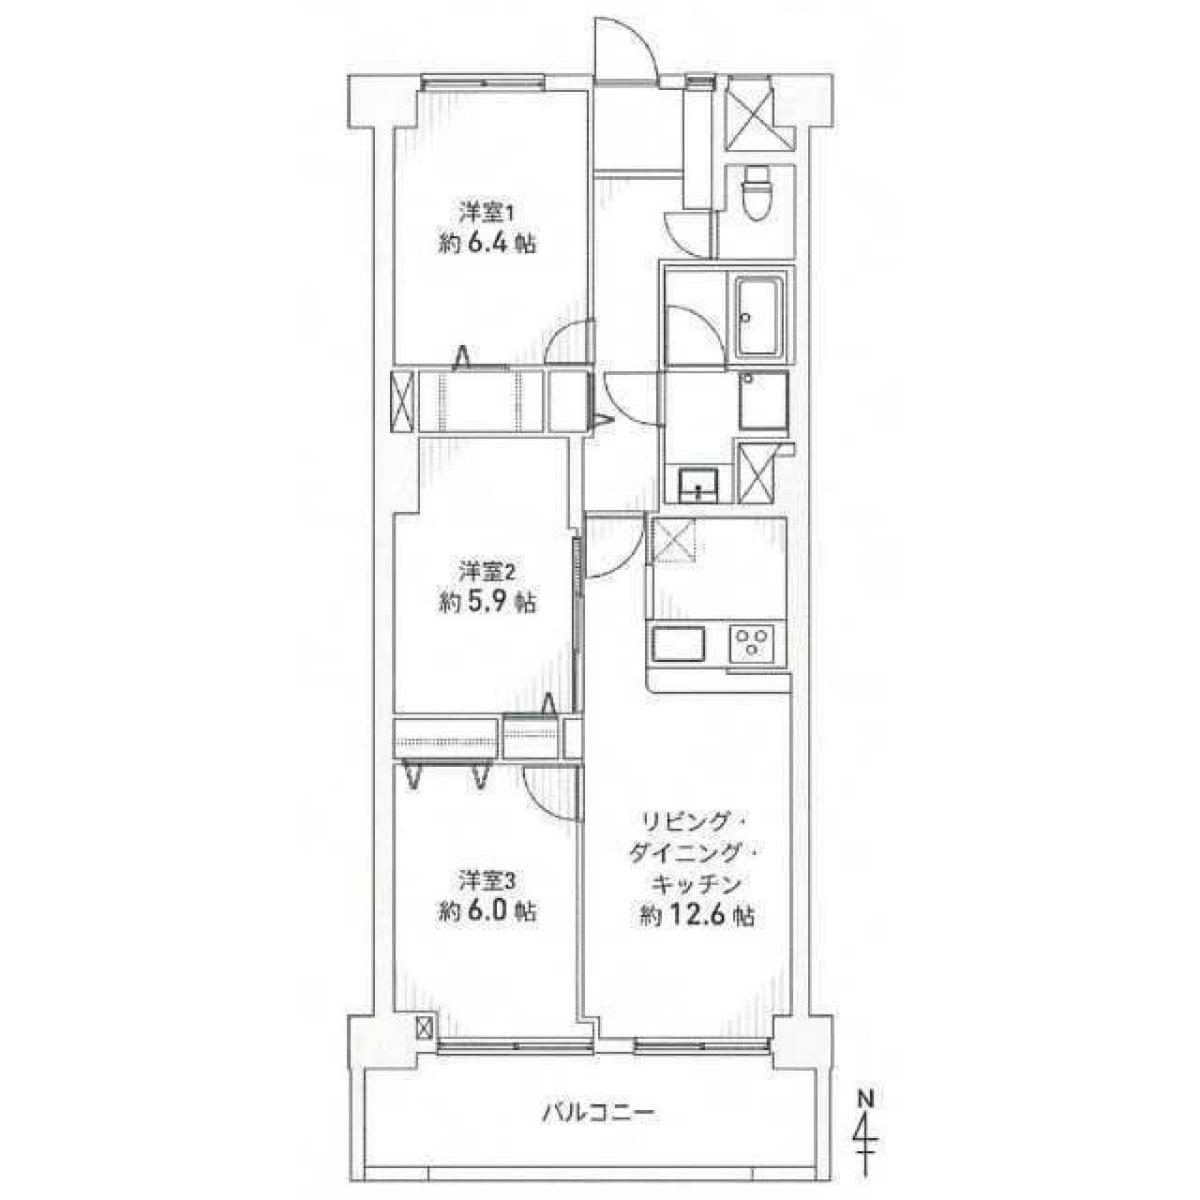 Picture of Apartment For Sale in Nagakute Shi, Aichi, Japan